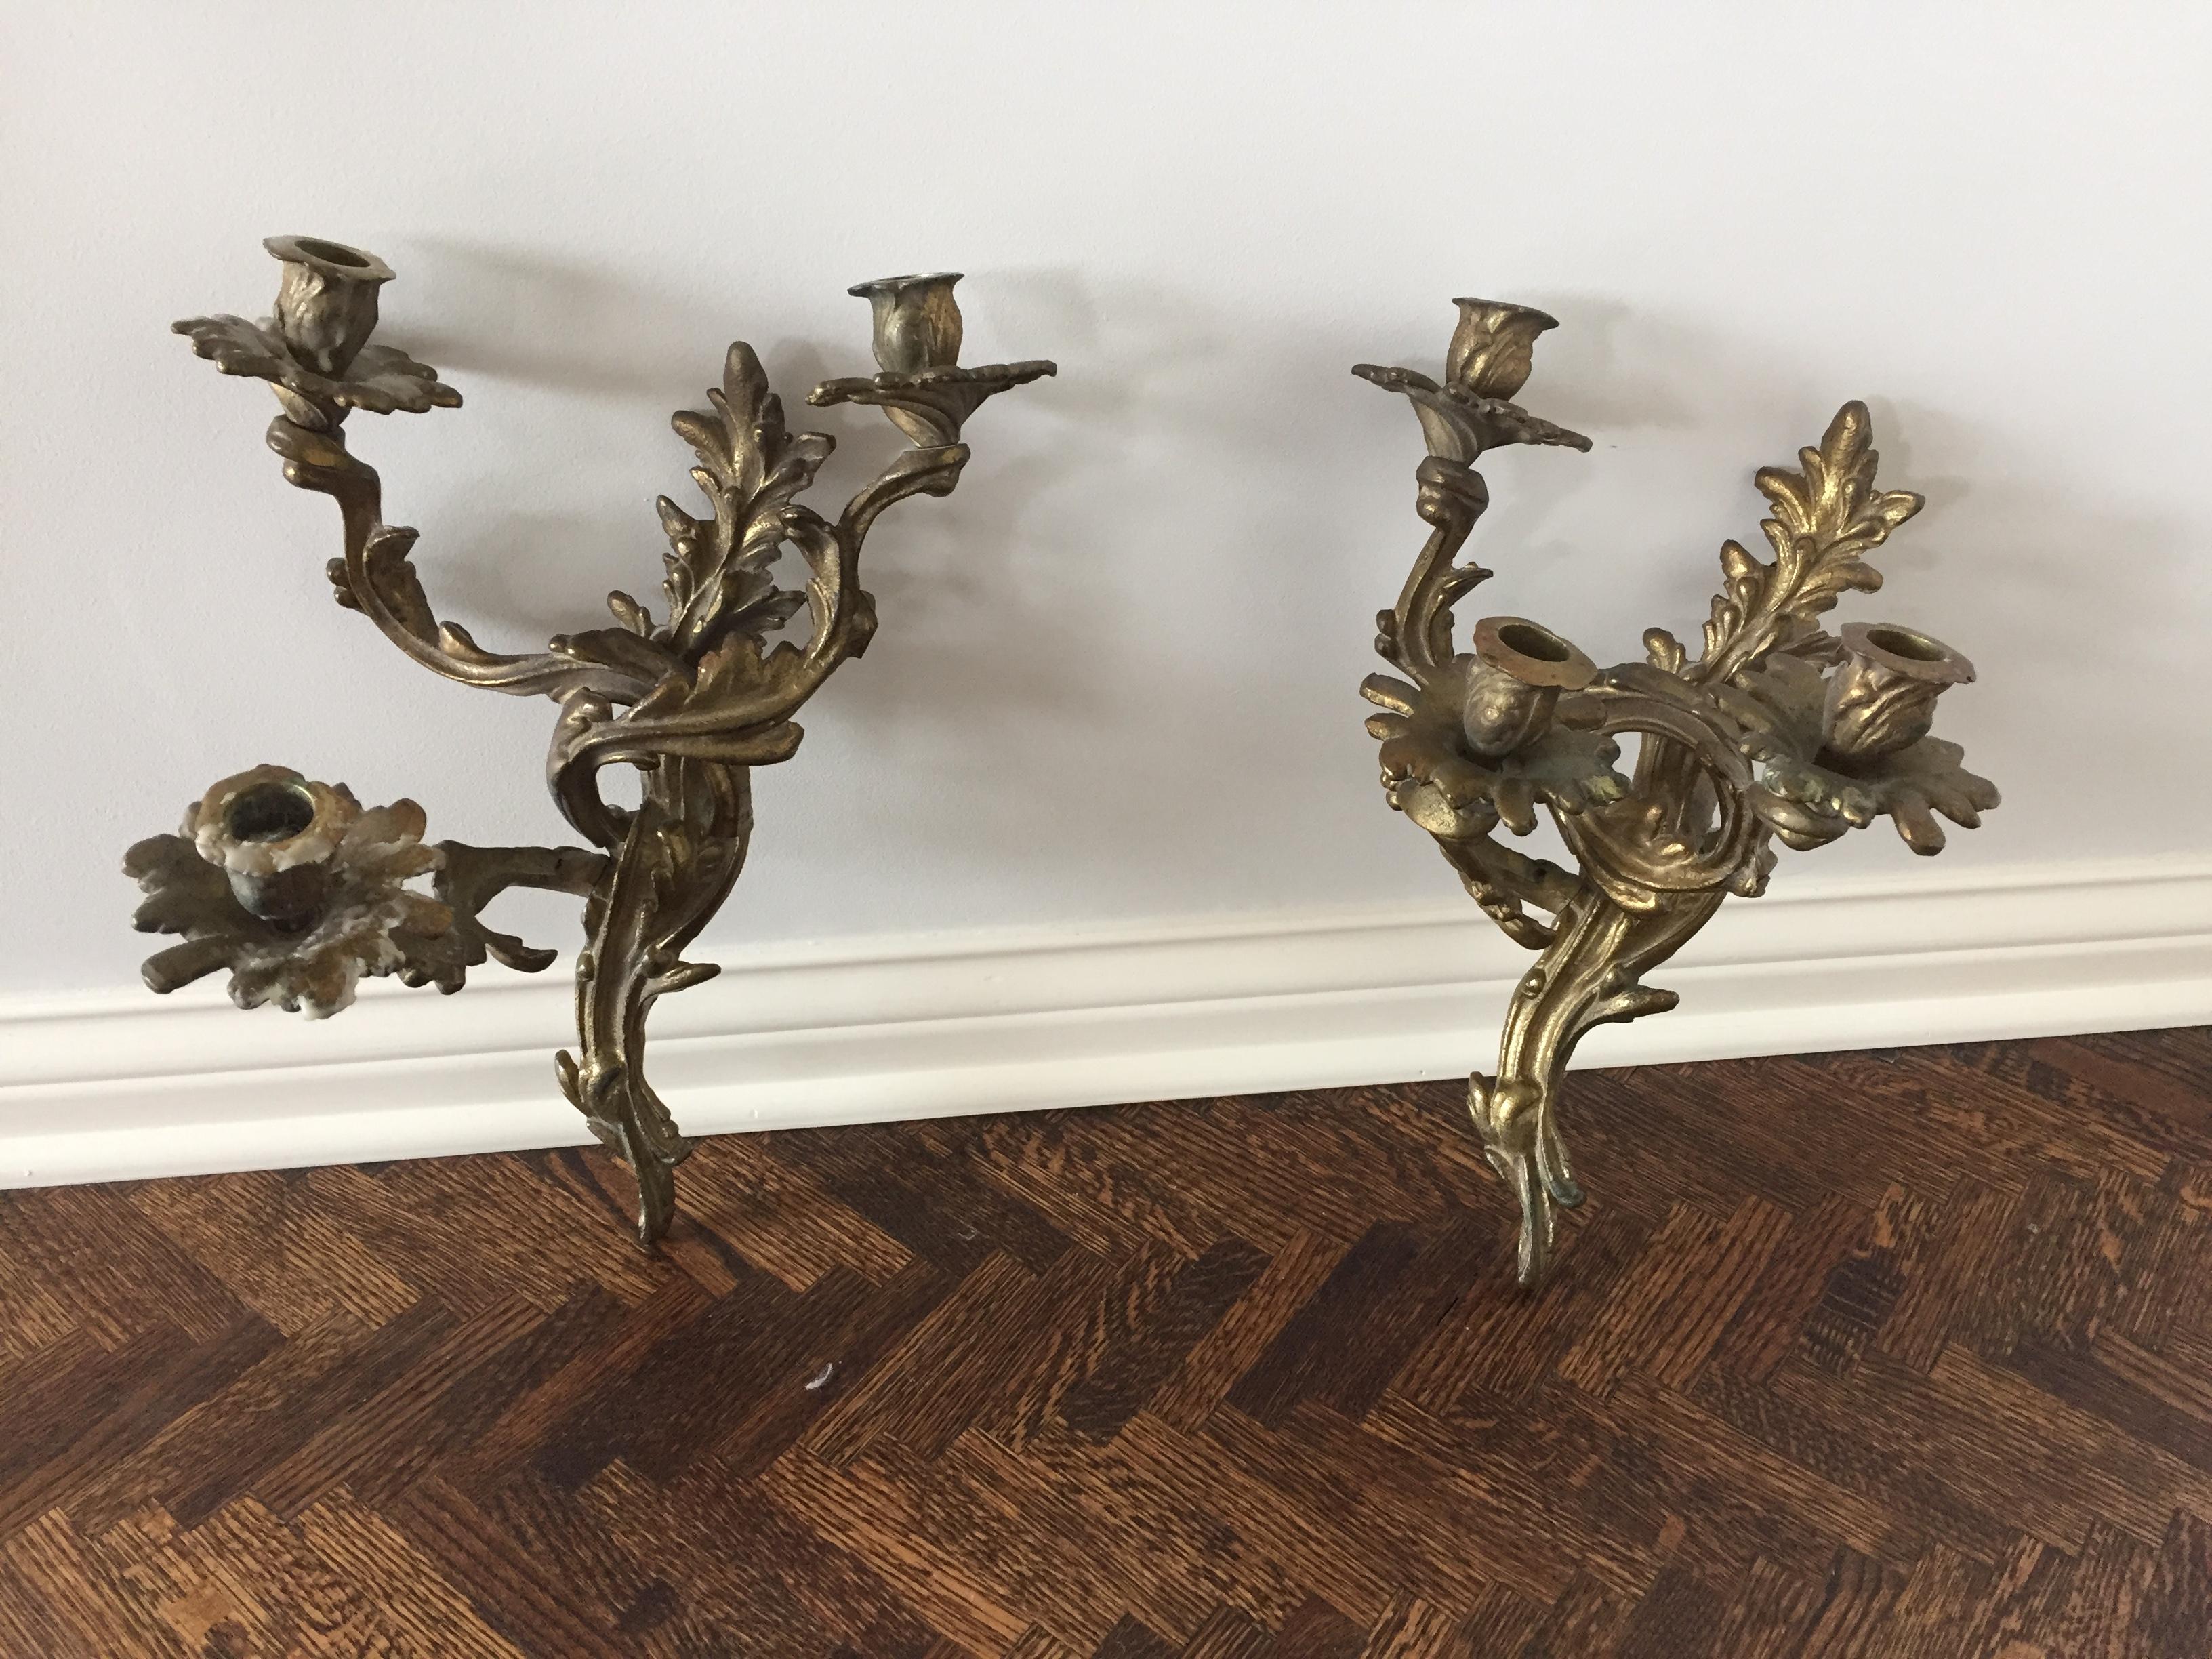 1920s bronze Italian 3-armed sconces, a pair
We purchased these incredible bronze candle sconces on a trip to Italy in the 1970s The shopkeeper told us they were from early 1900s. They are very heavy, due to solid construction. All three arms move